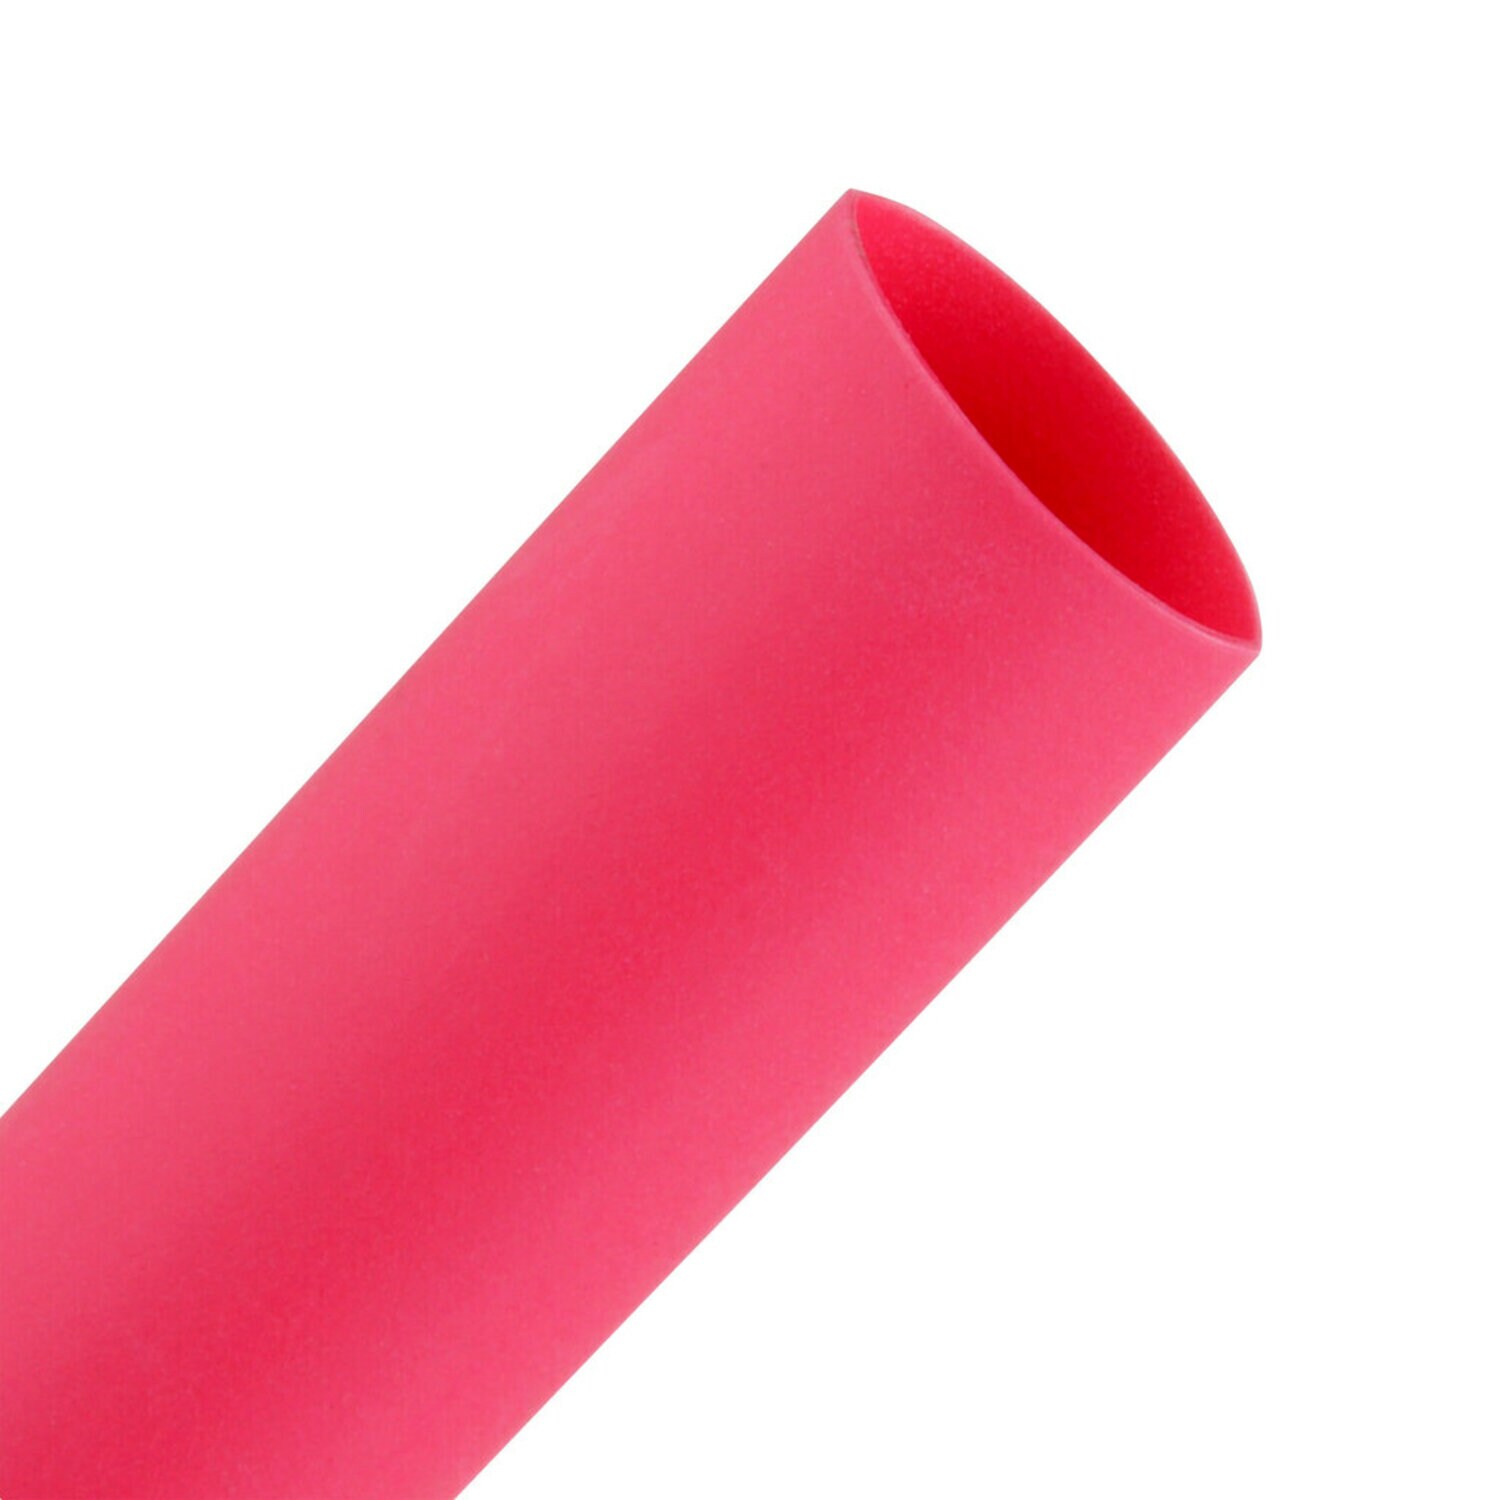 7010400825 - 3M Heat Shrink Thin-Wall Tubing FP-301-1/2-48"-Red-100 Pcs, 48 in
Length sticks, 100 pieces/case